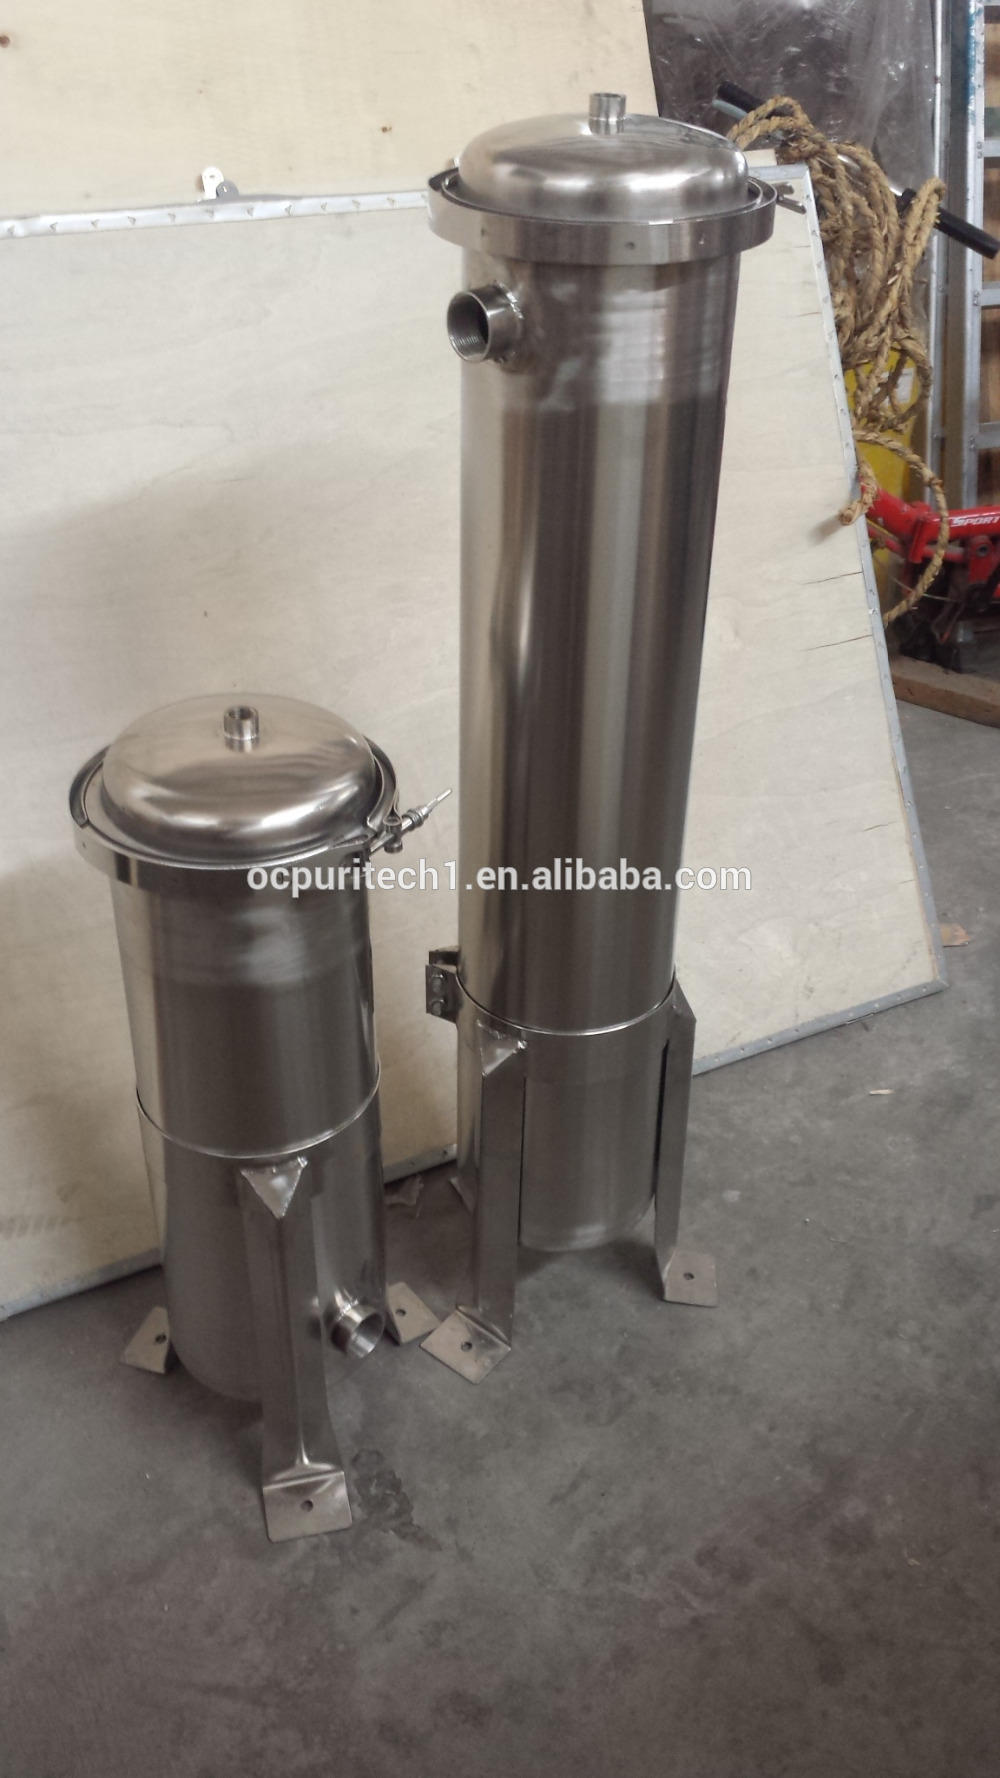 product-Ocpuritech-410mm - 810mm single bag Stainless steel water bag filter housing-img